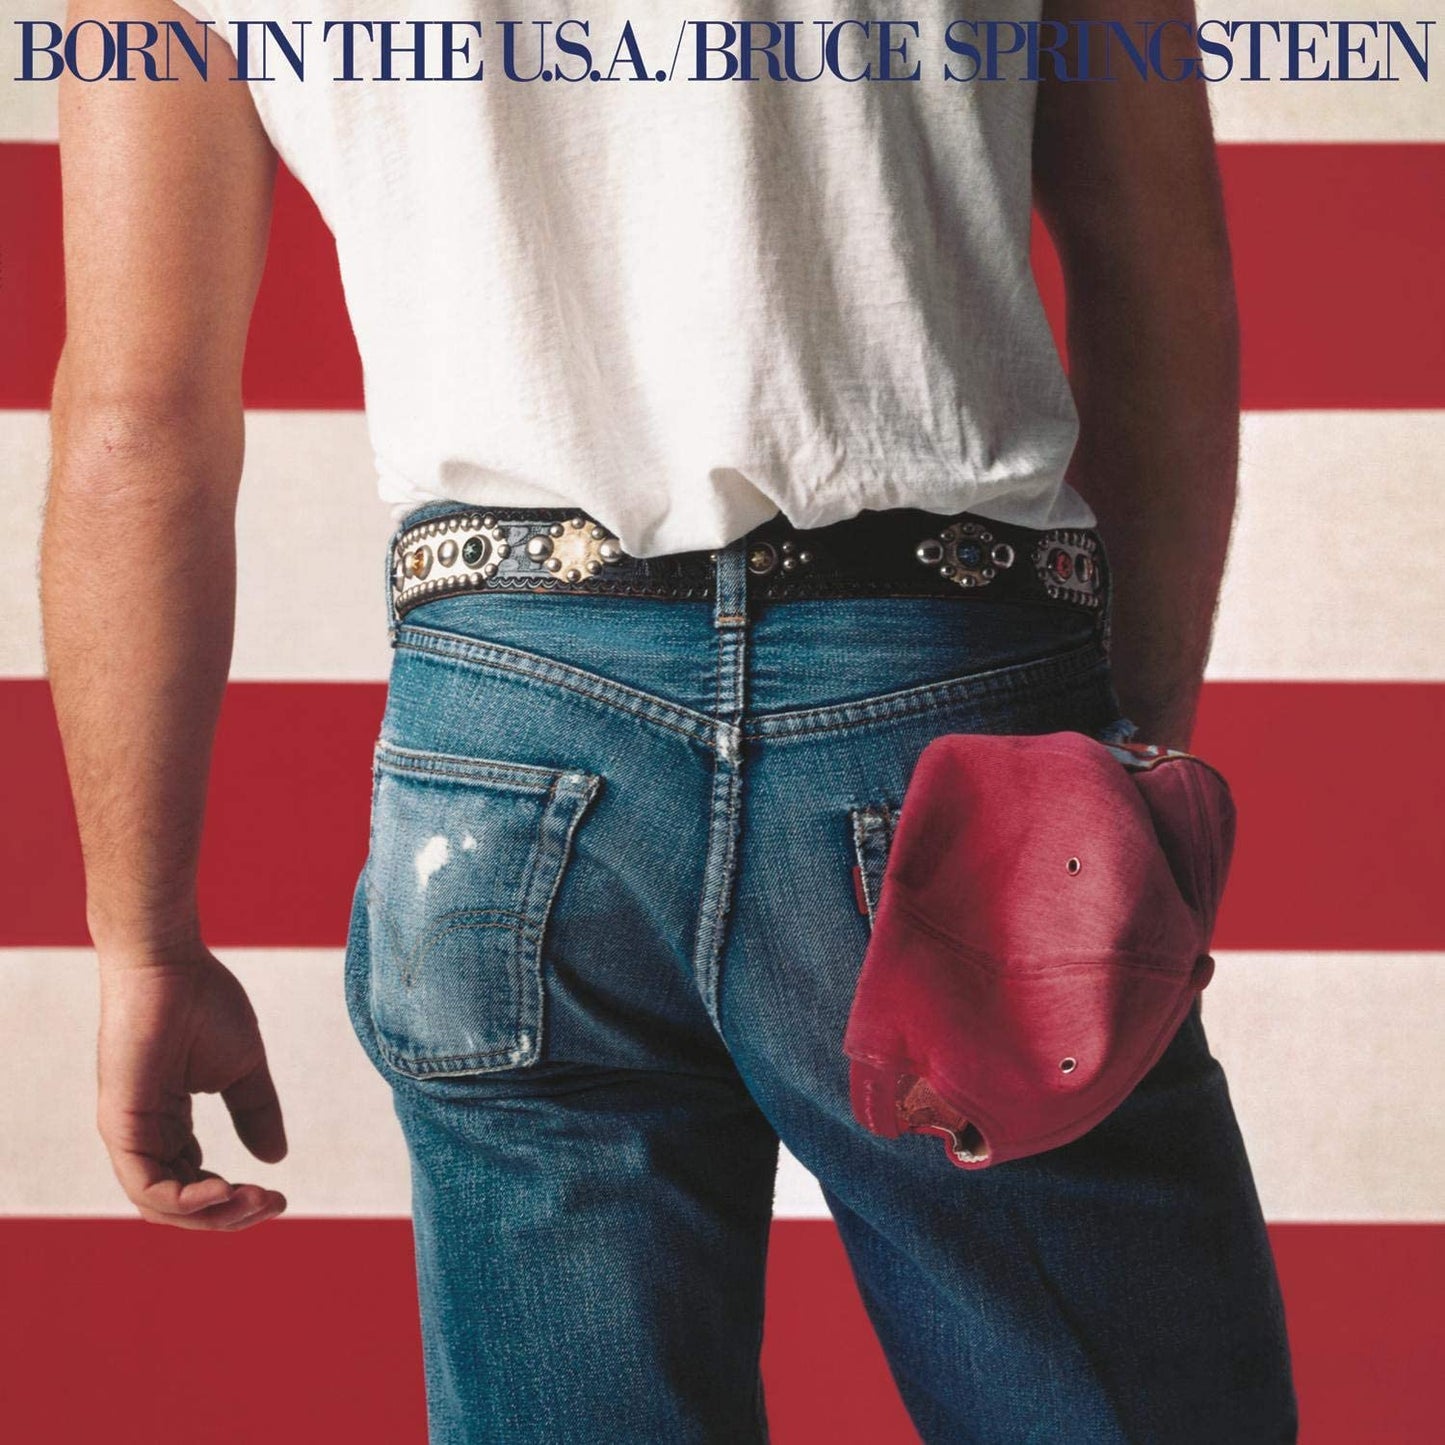 Springsteen, Bruce/Born In the U.S.A. [LP]